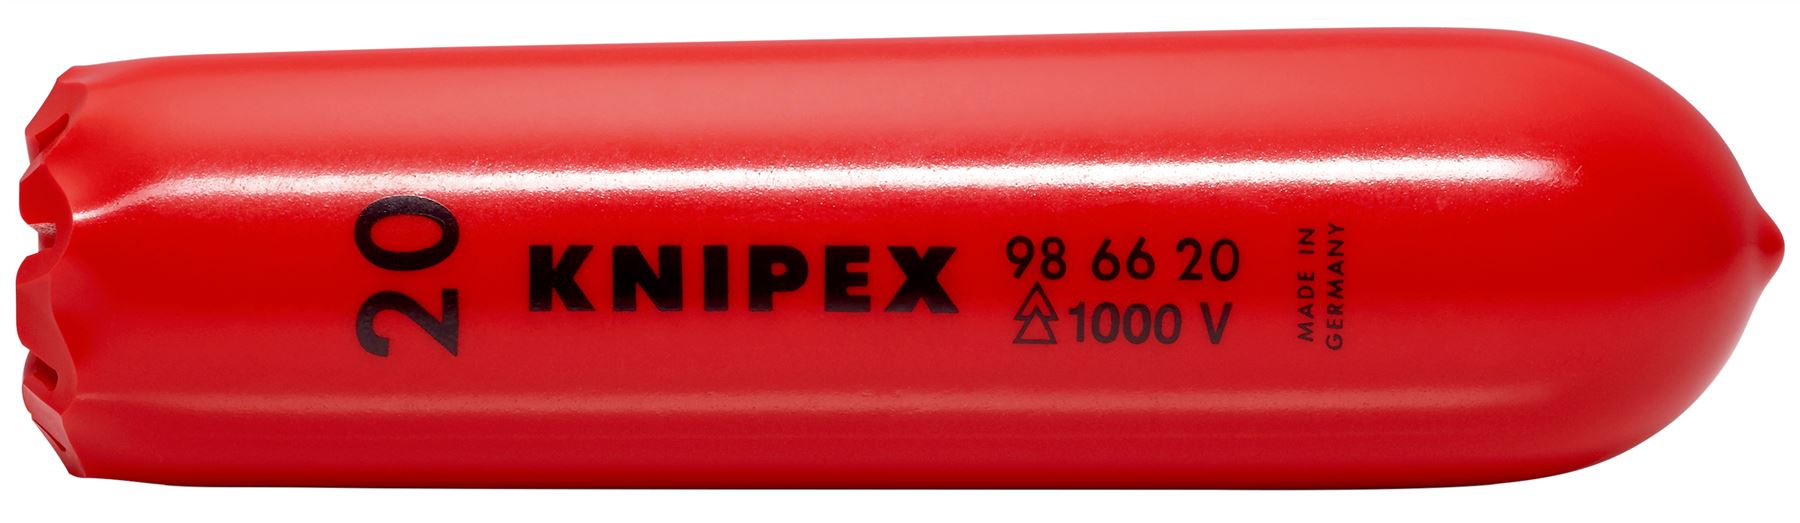 KNIPEX Self Clamping Slip On Cap 100mm to Cover Bare Live Cable Ends Insulated 1000V 98 66 20